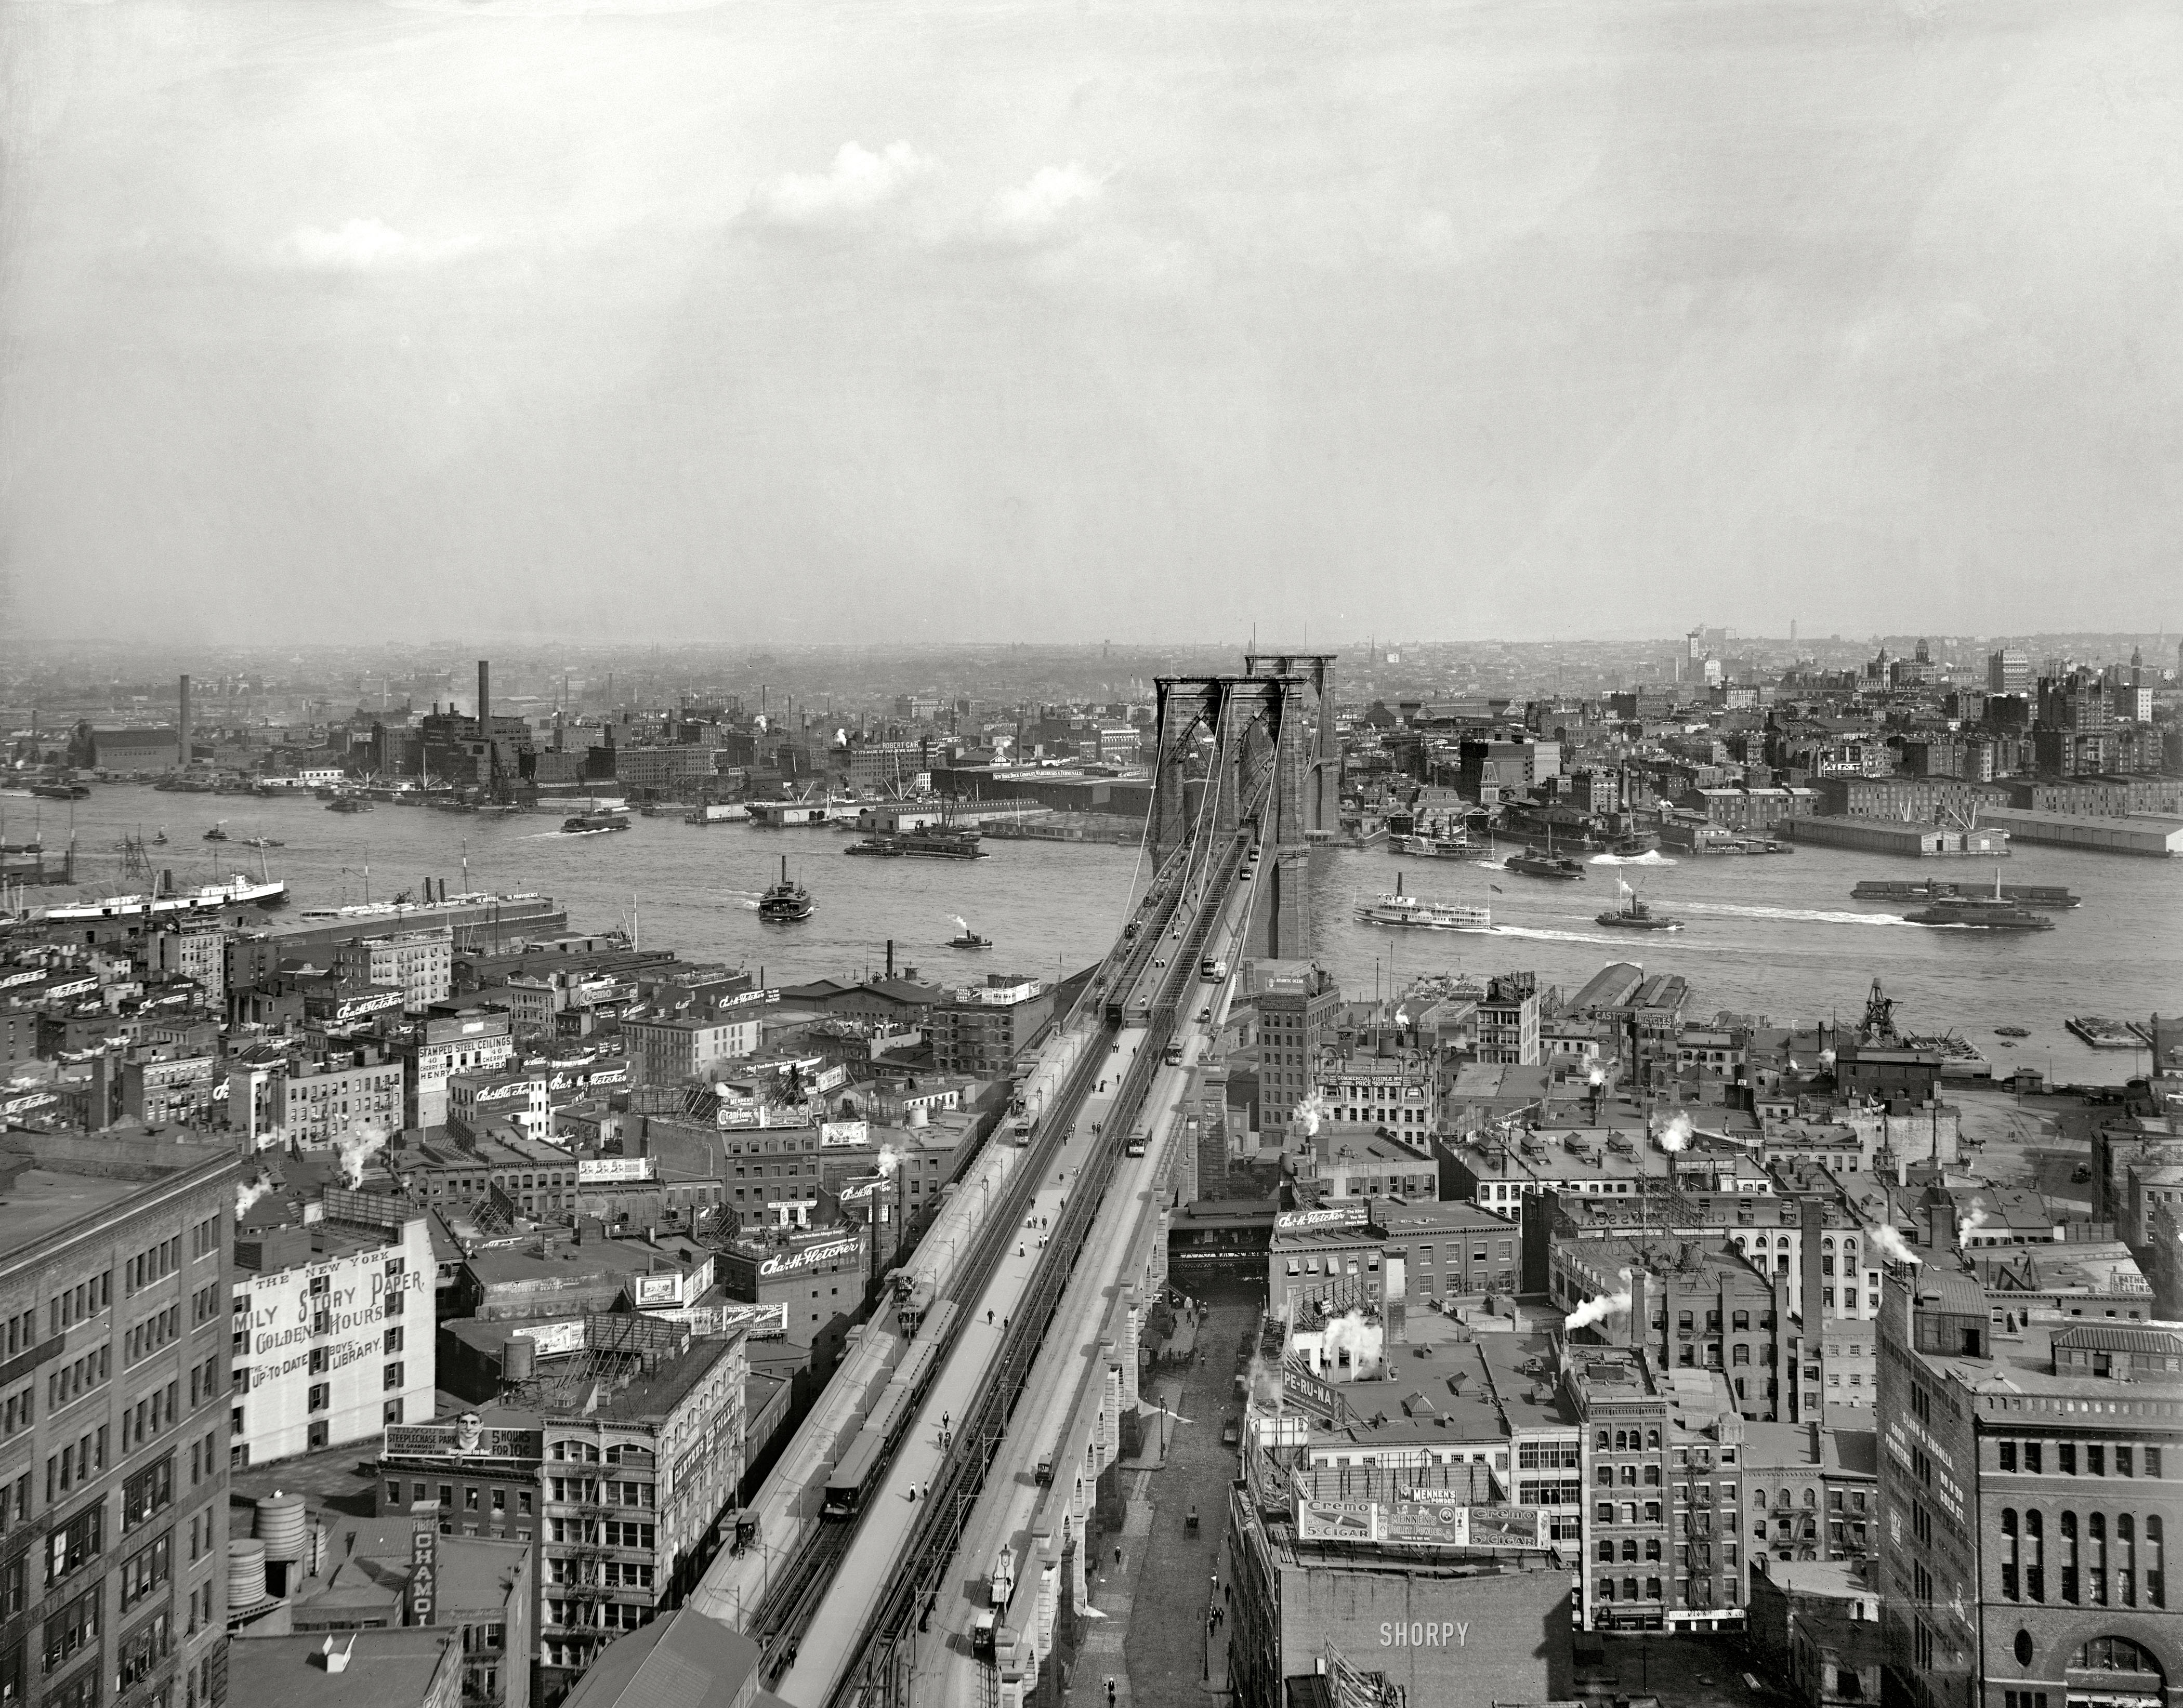 New York circa 1903. "East River and Brooklyn Bridge from Manhattan." Among the many signs competing for our attention are billboards for "Crani-Tonic Hair Food" and Moxie. 8x10 glass negative, Detroit Publishing Co. View full size.